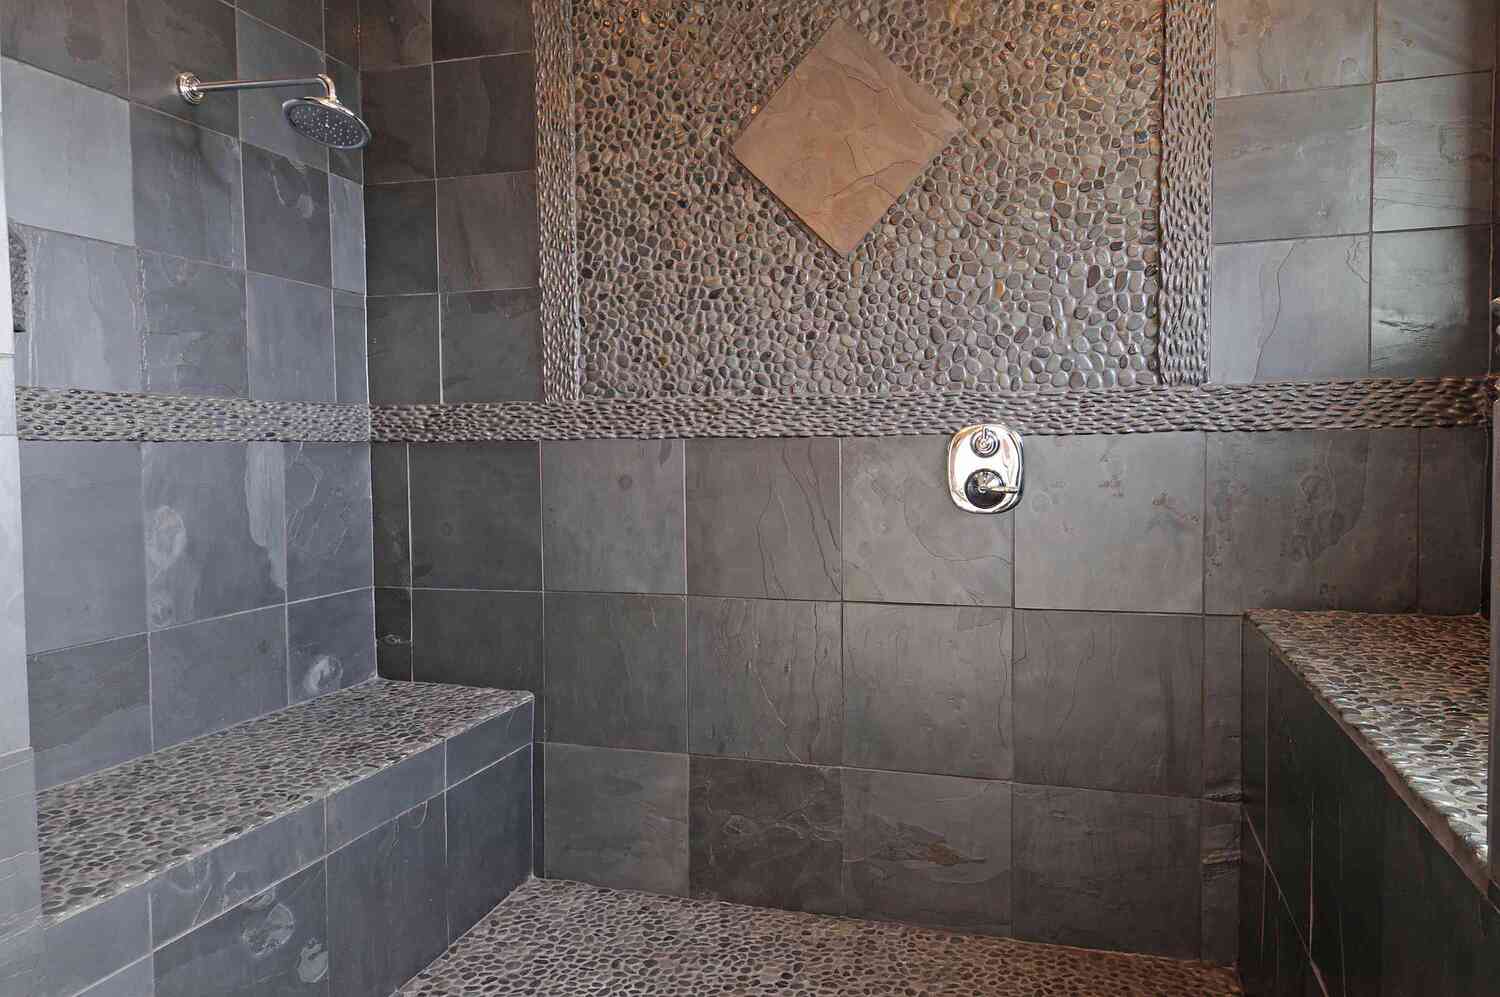 How To Clean A Stone Shower Tile